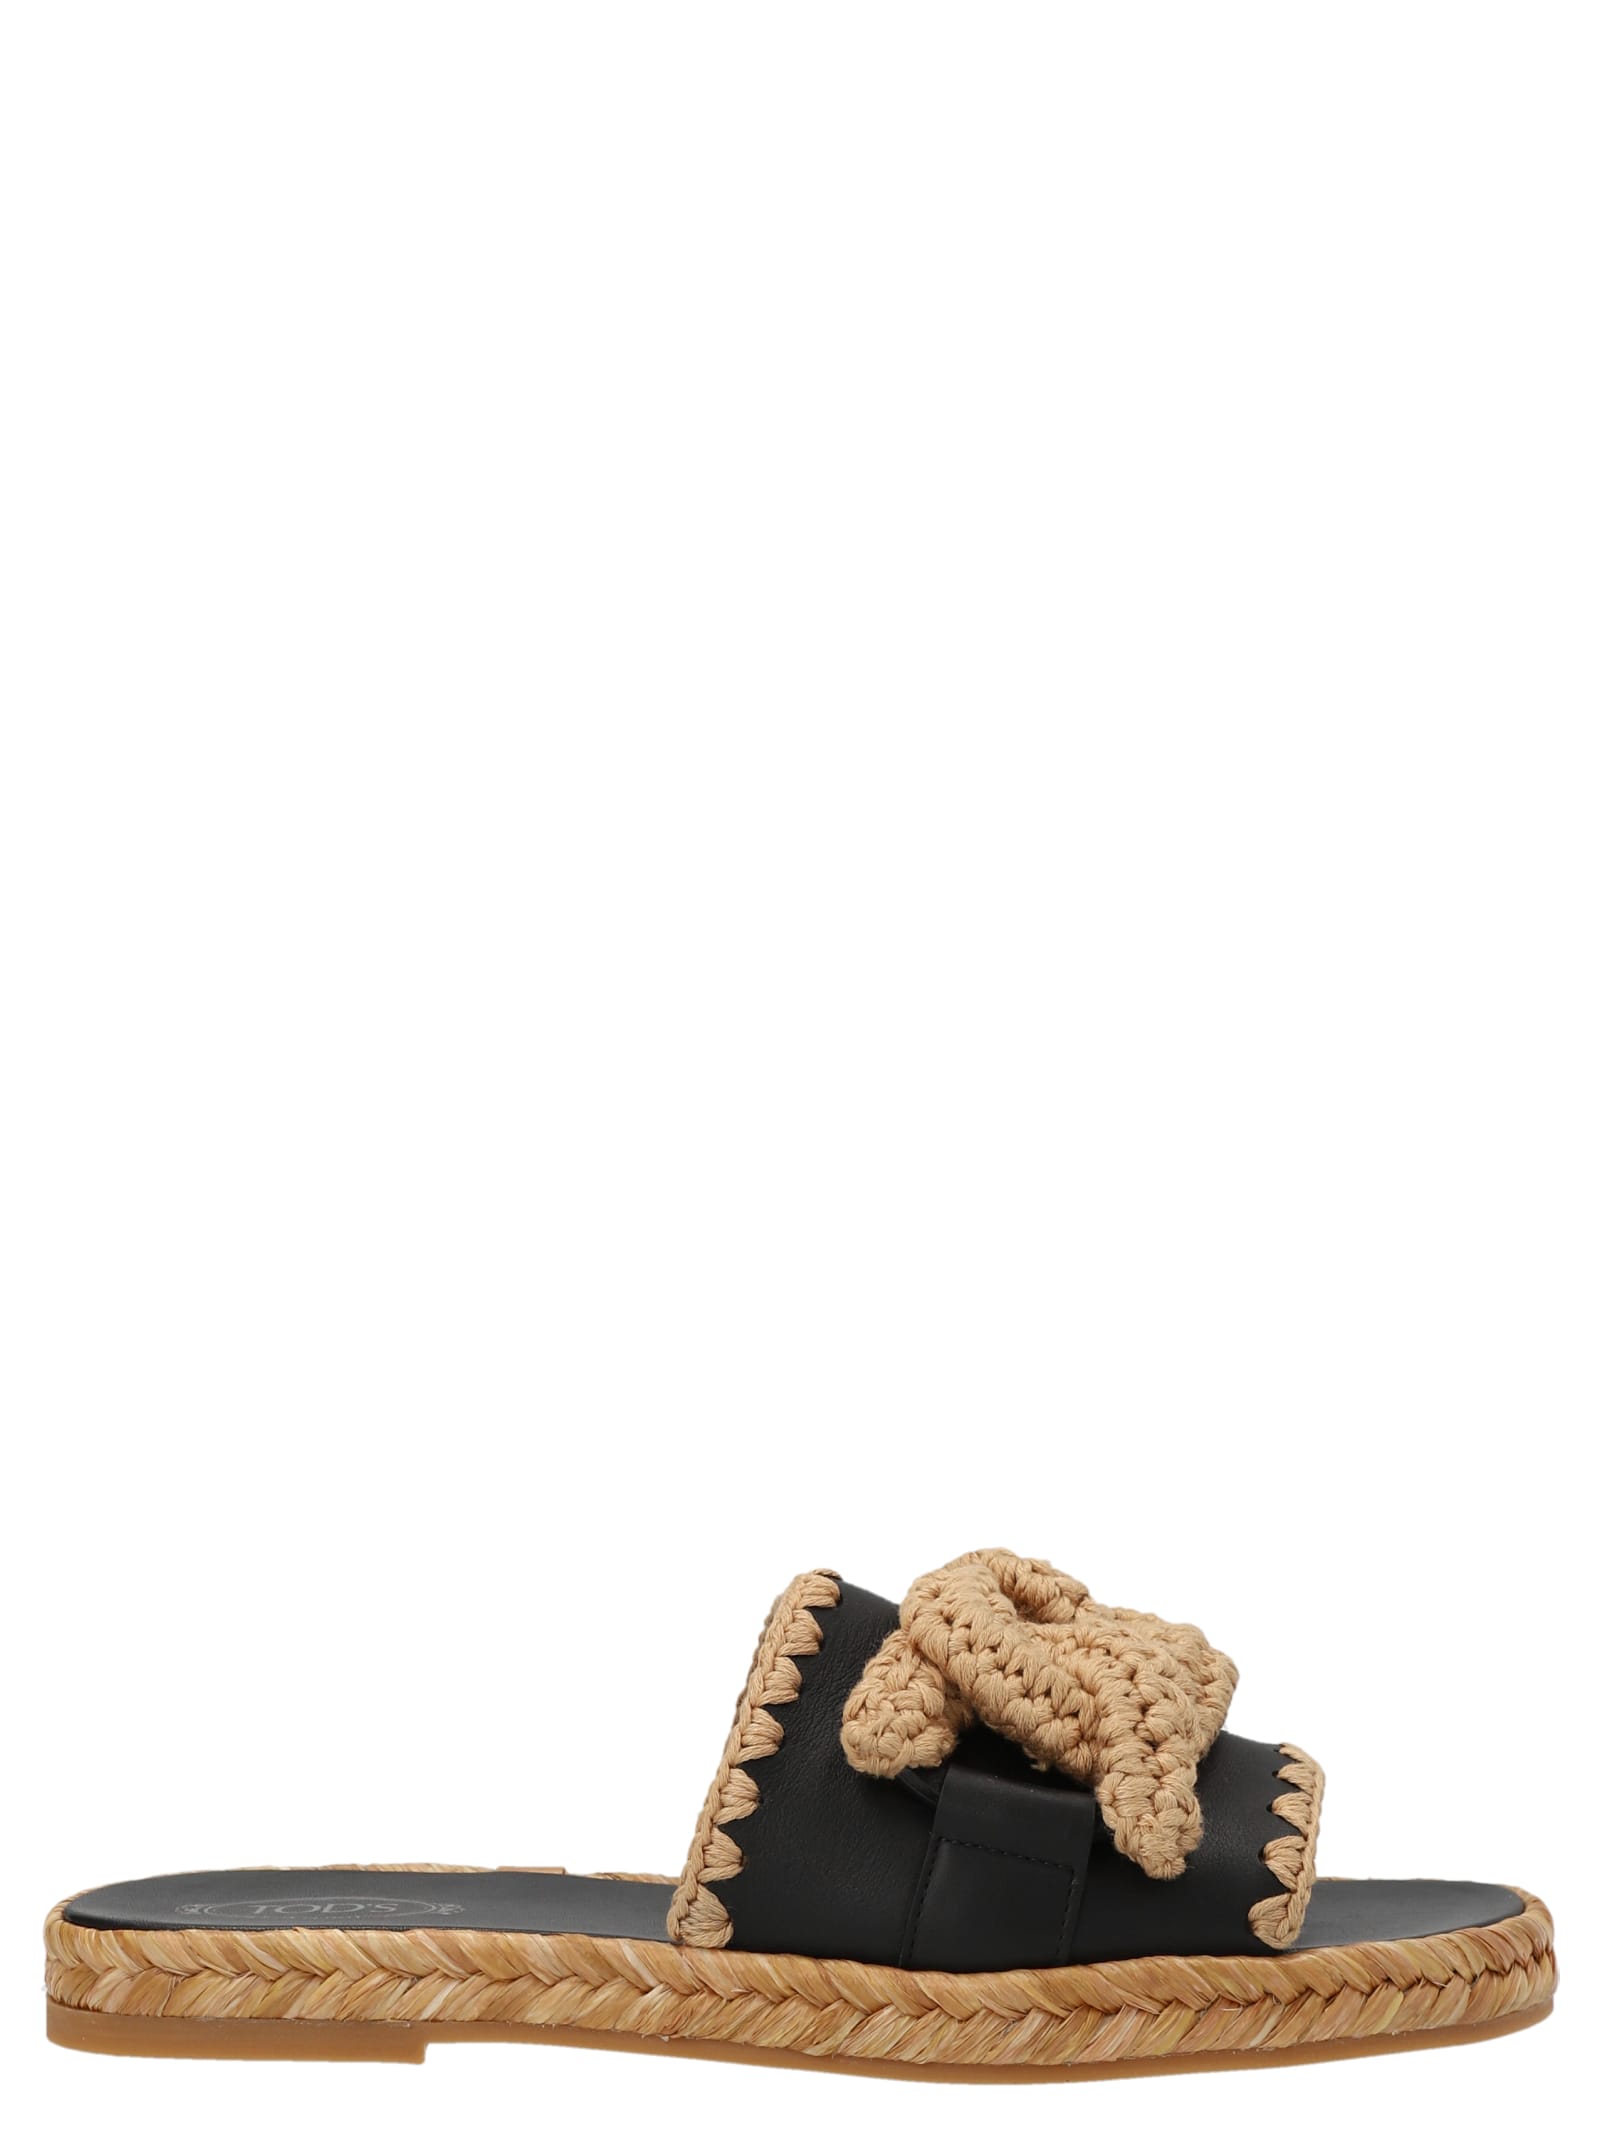 TOD'S KATE SANDALS